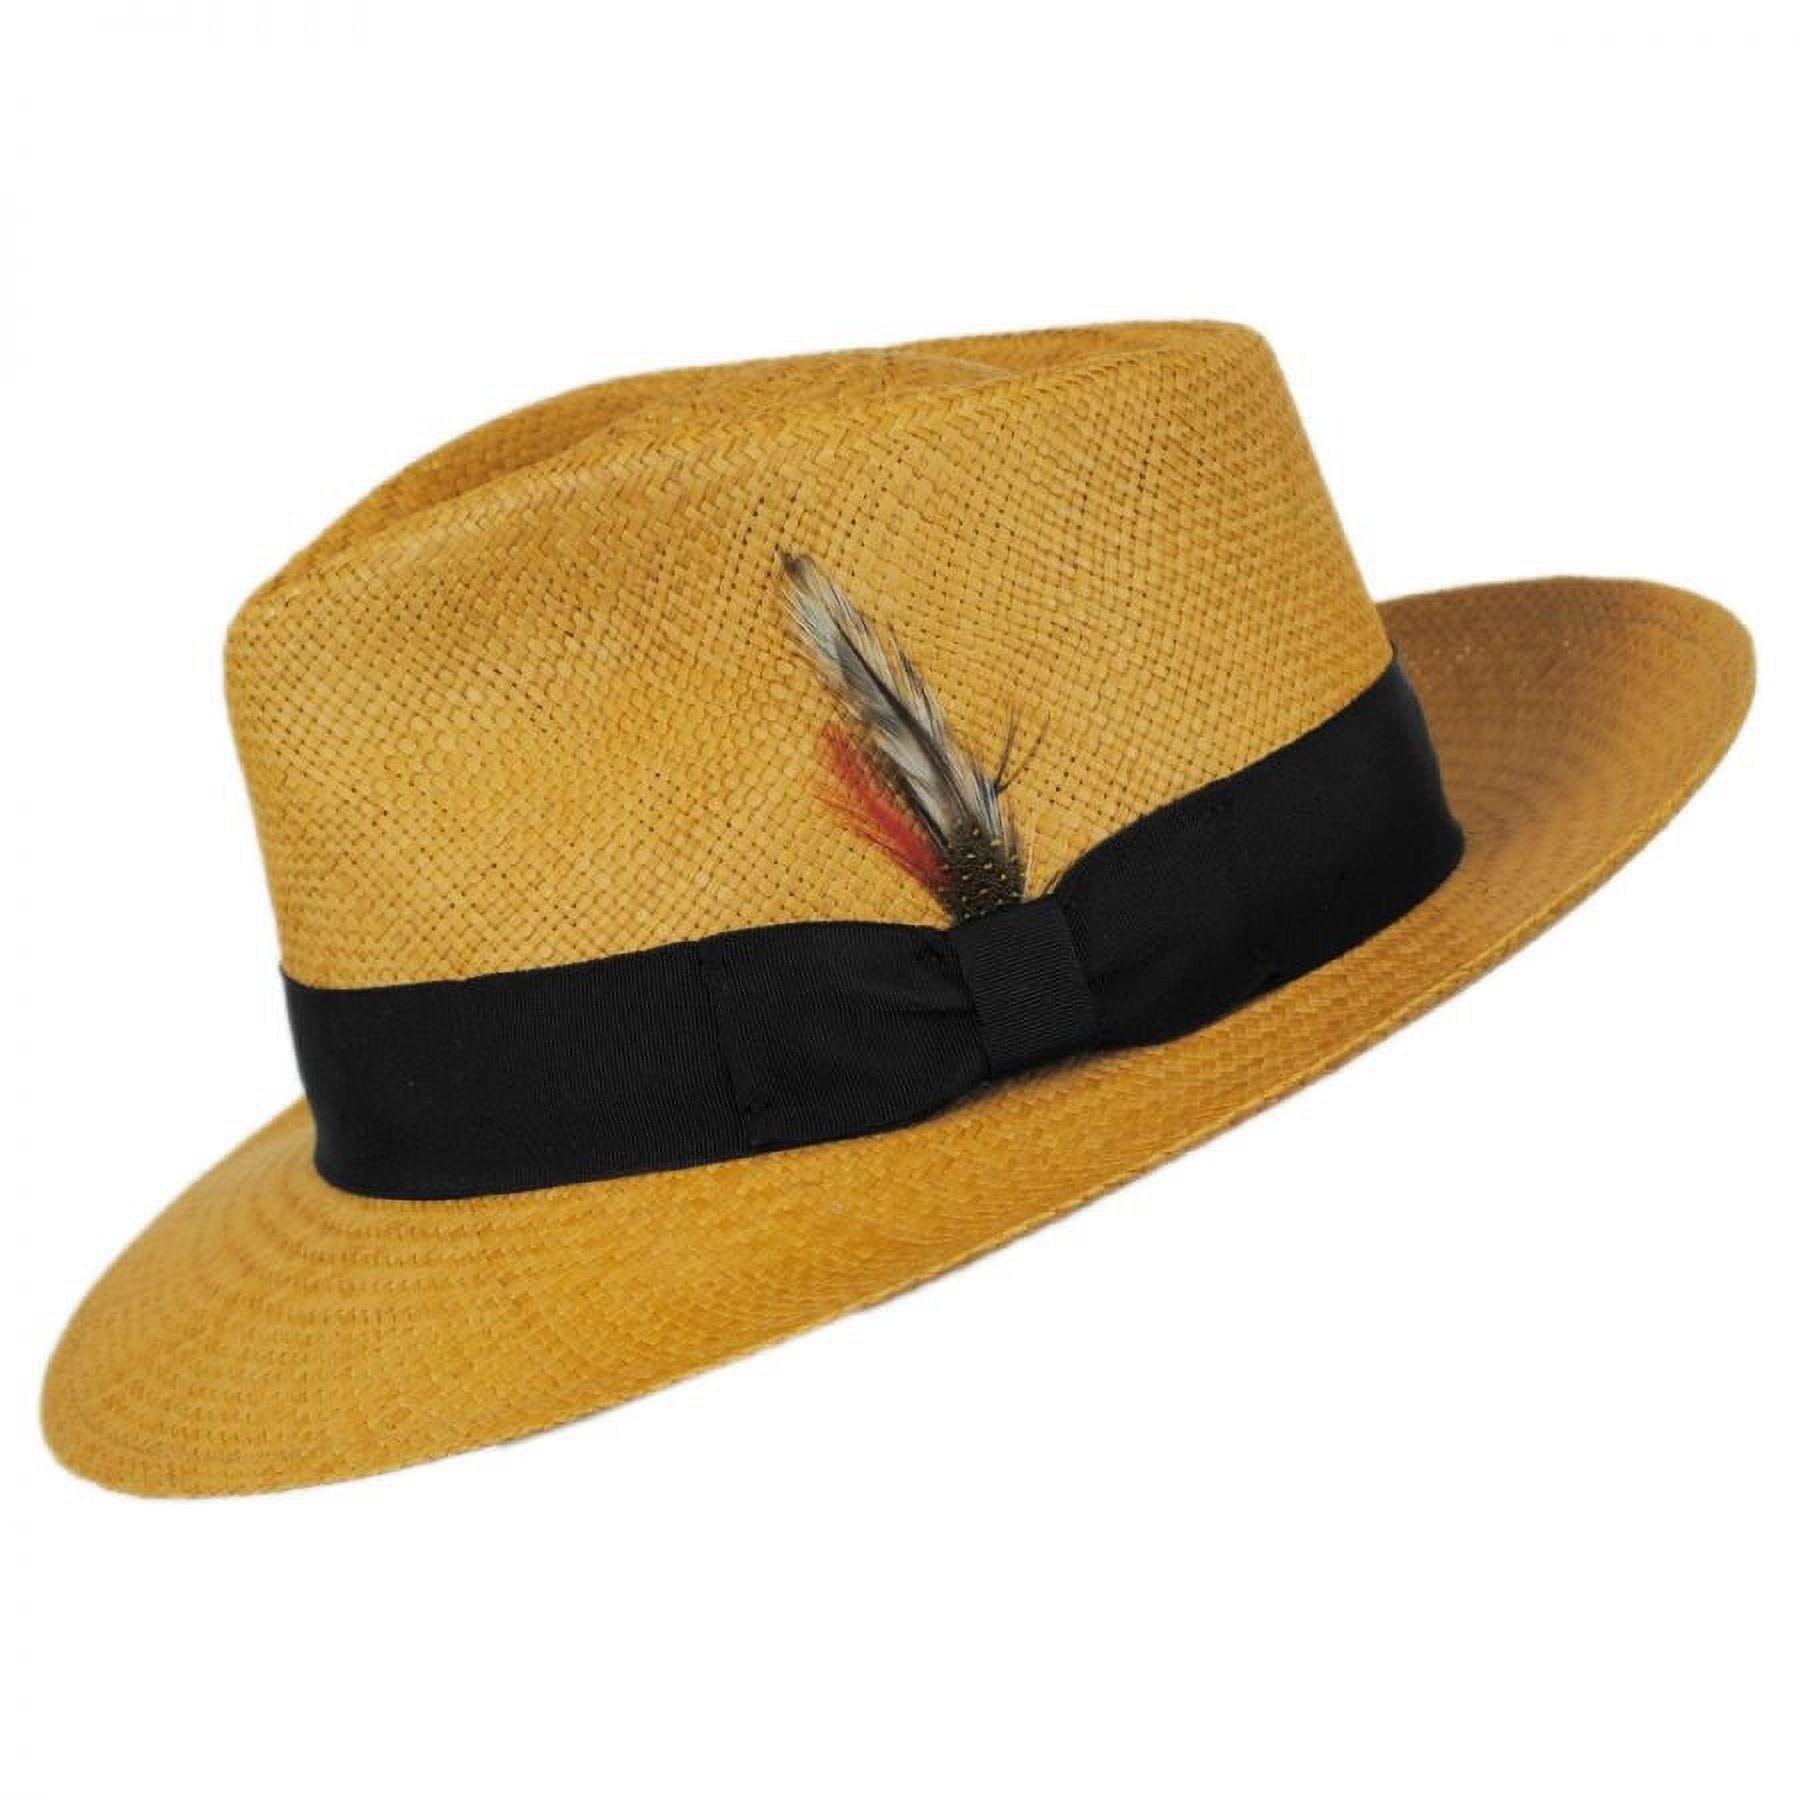 Stain Repellent Panama Straw C-Crown Fedora Hat - M - Putty - image 3 of 4